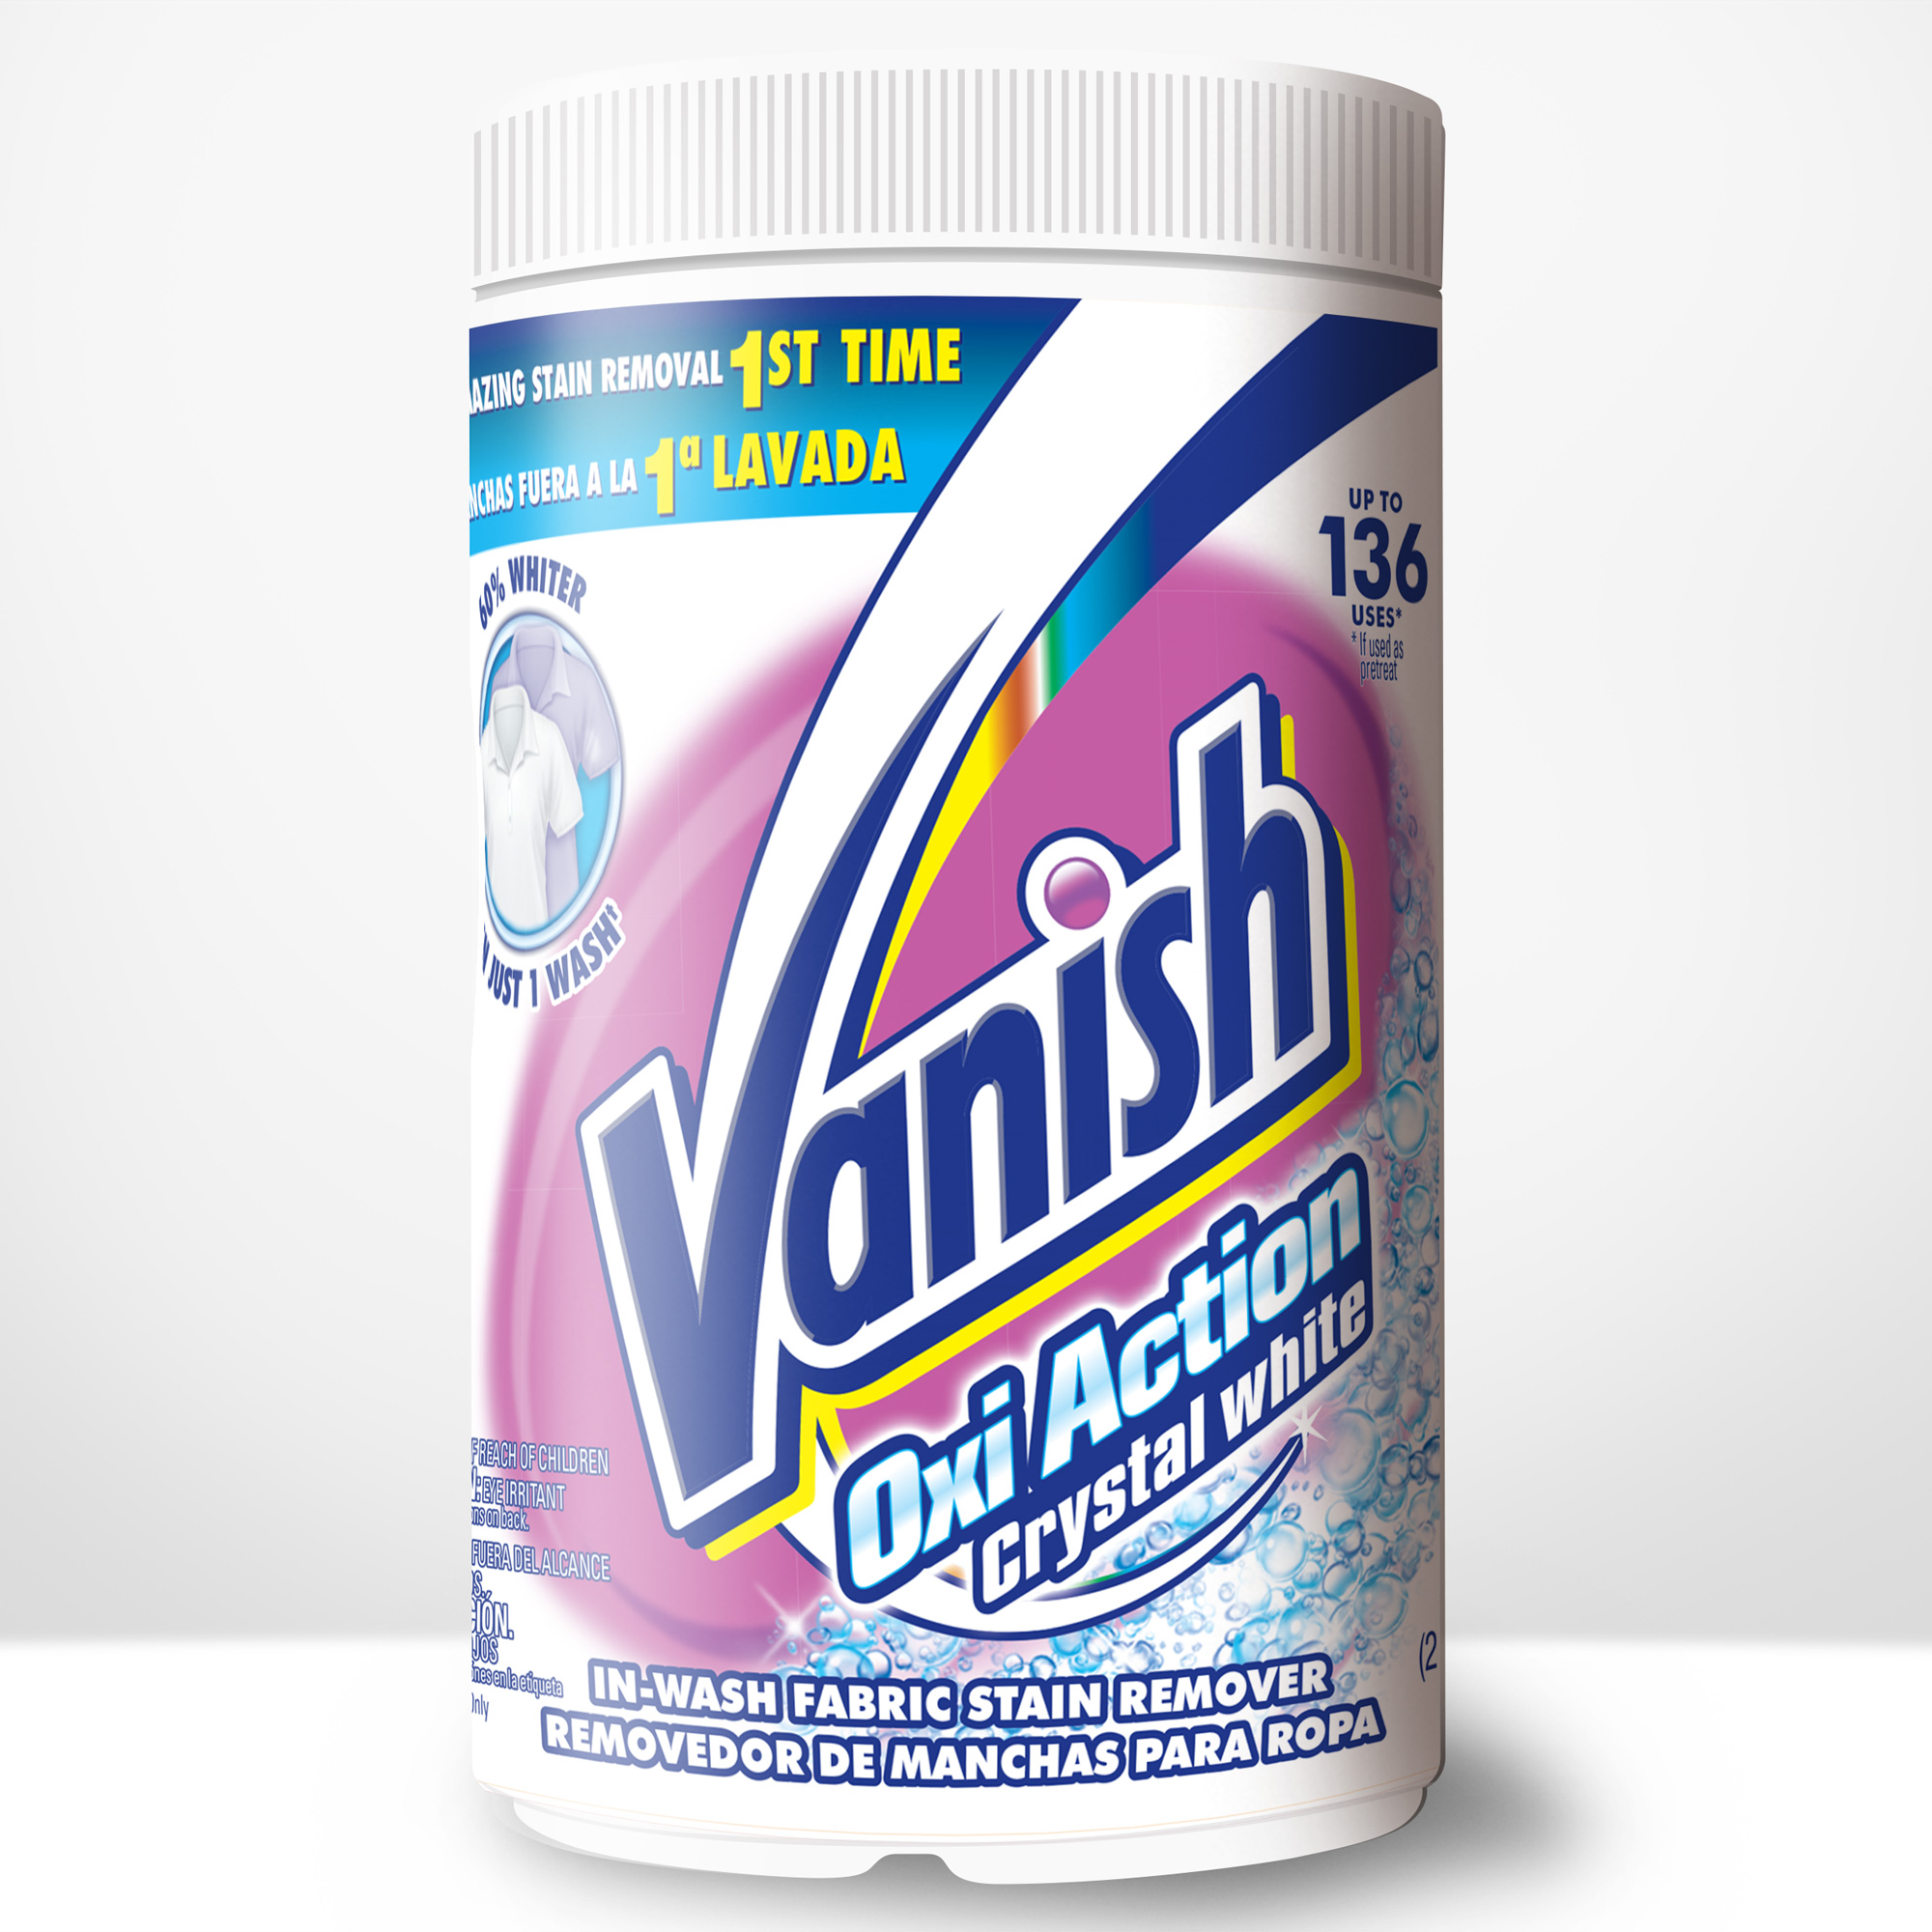 VANISH Oxi Action Crystal White InWash Fabric Stain Remover